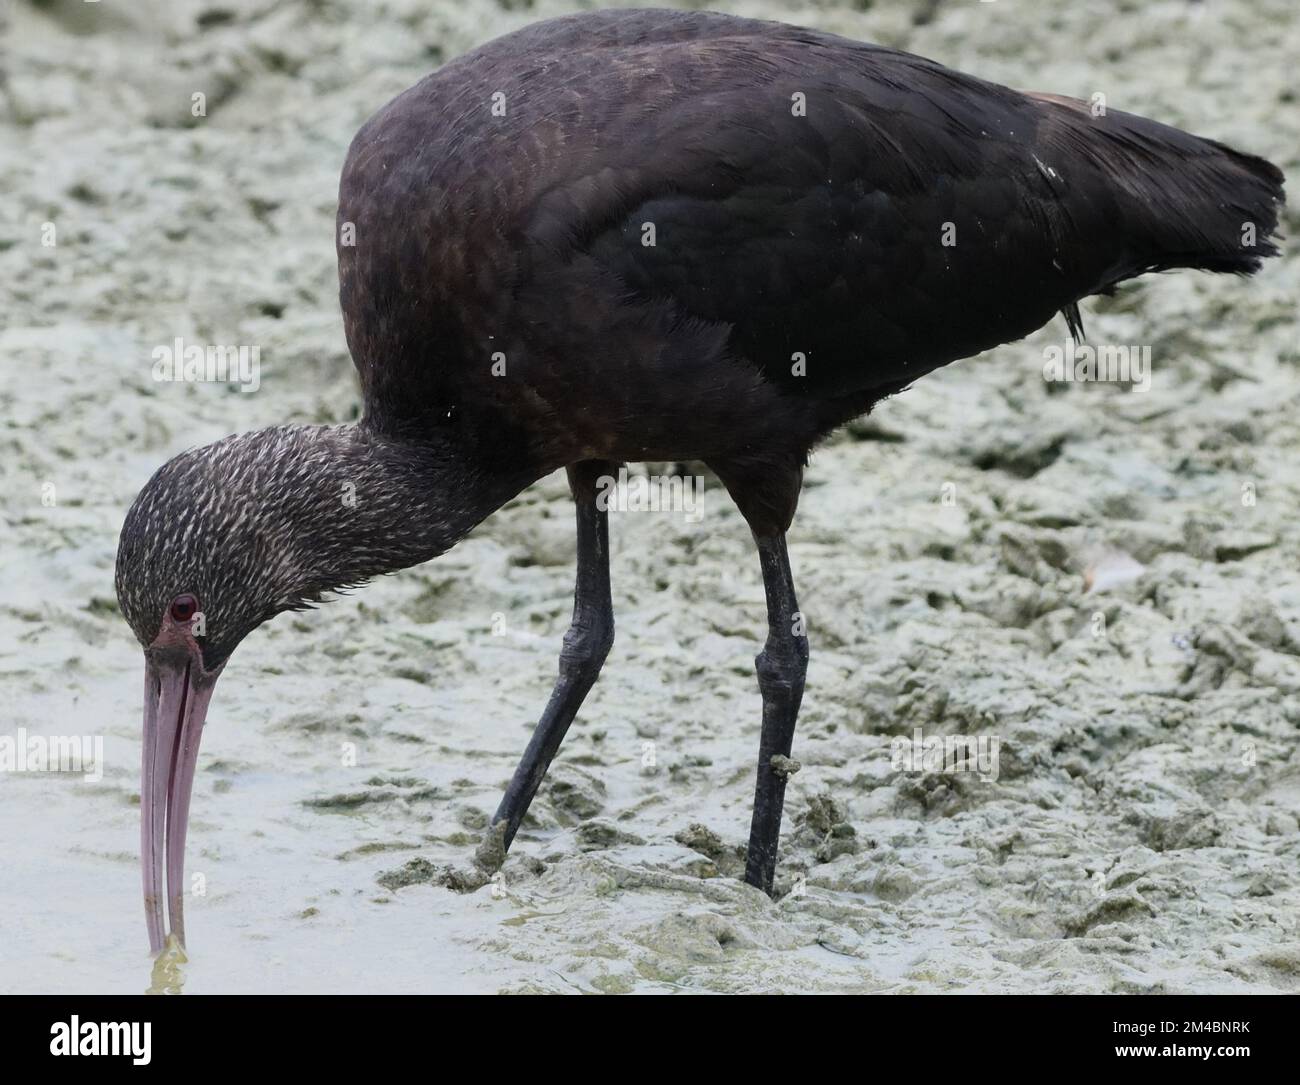 puna ibis (Plegadis ridgwayi) probes the mud in a shallow pond for invertebrates with its long curved bill. Stock Photo